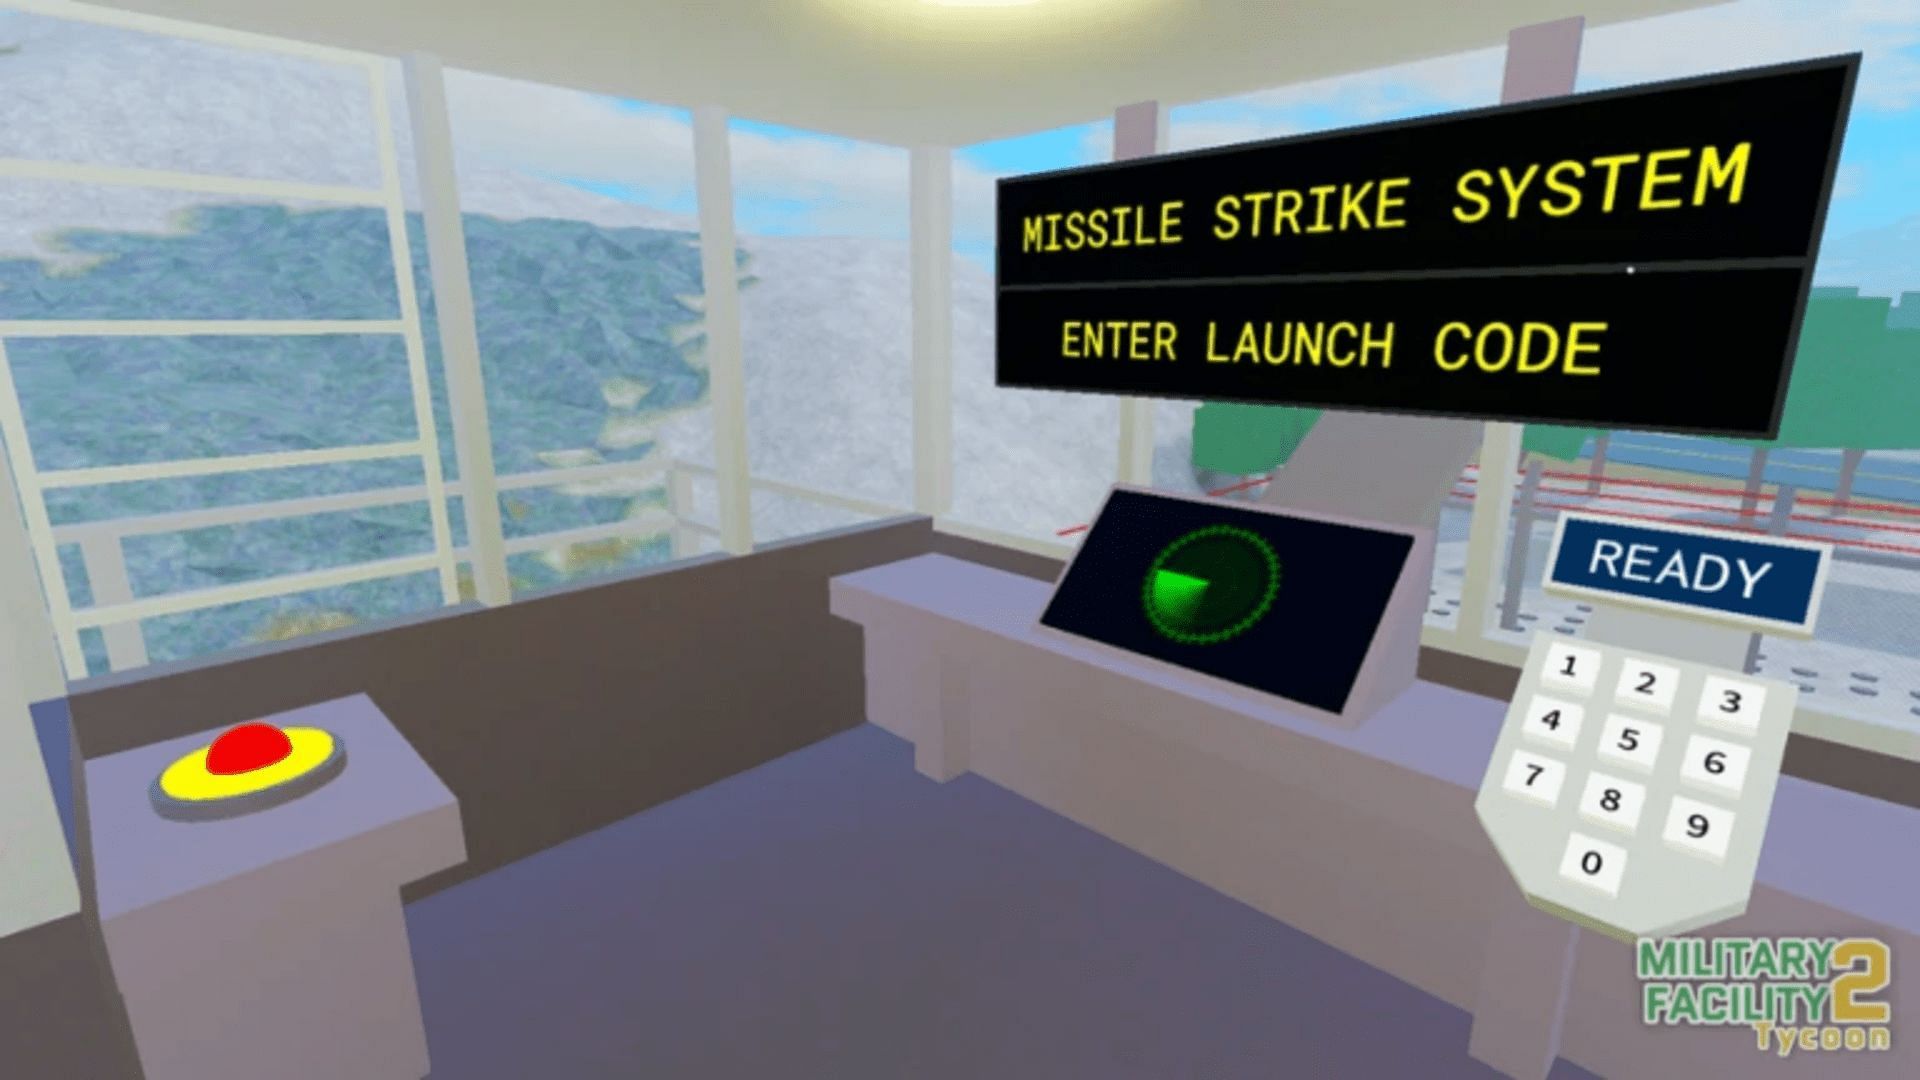 Active codes for Military Facility Tycoon 2 (Image via Roblox)